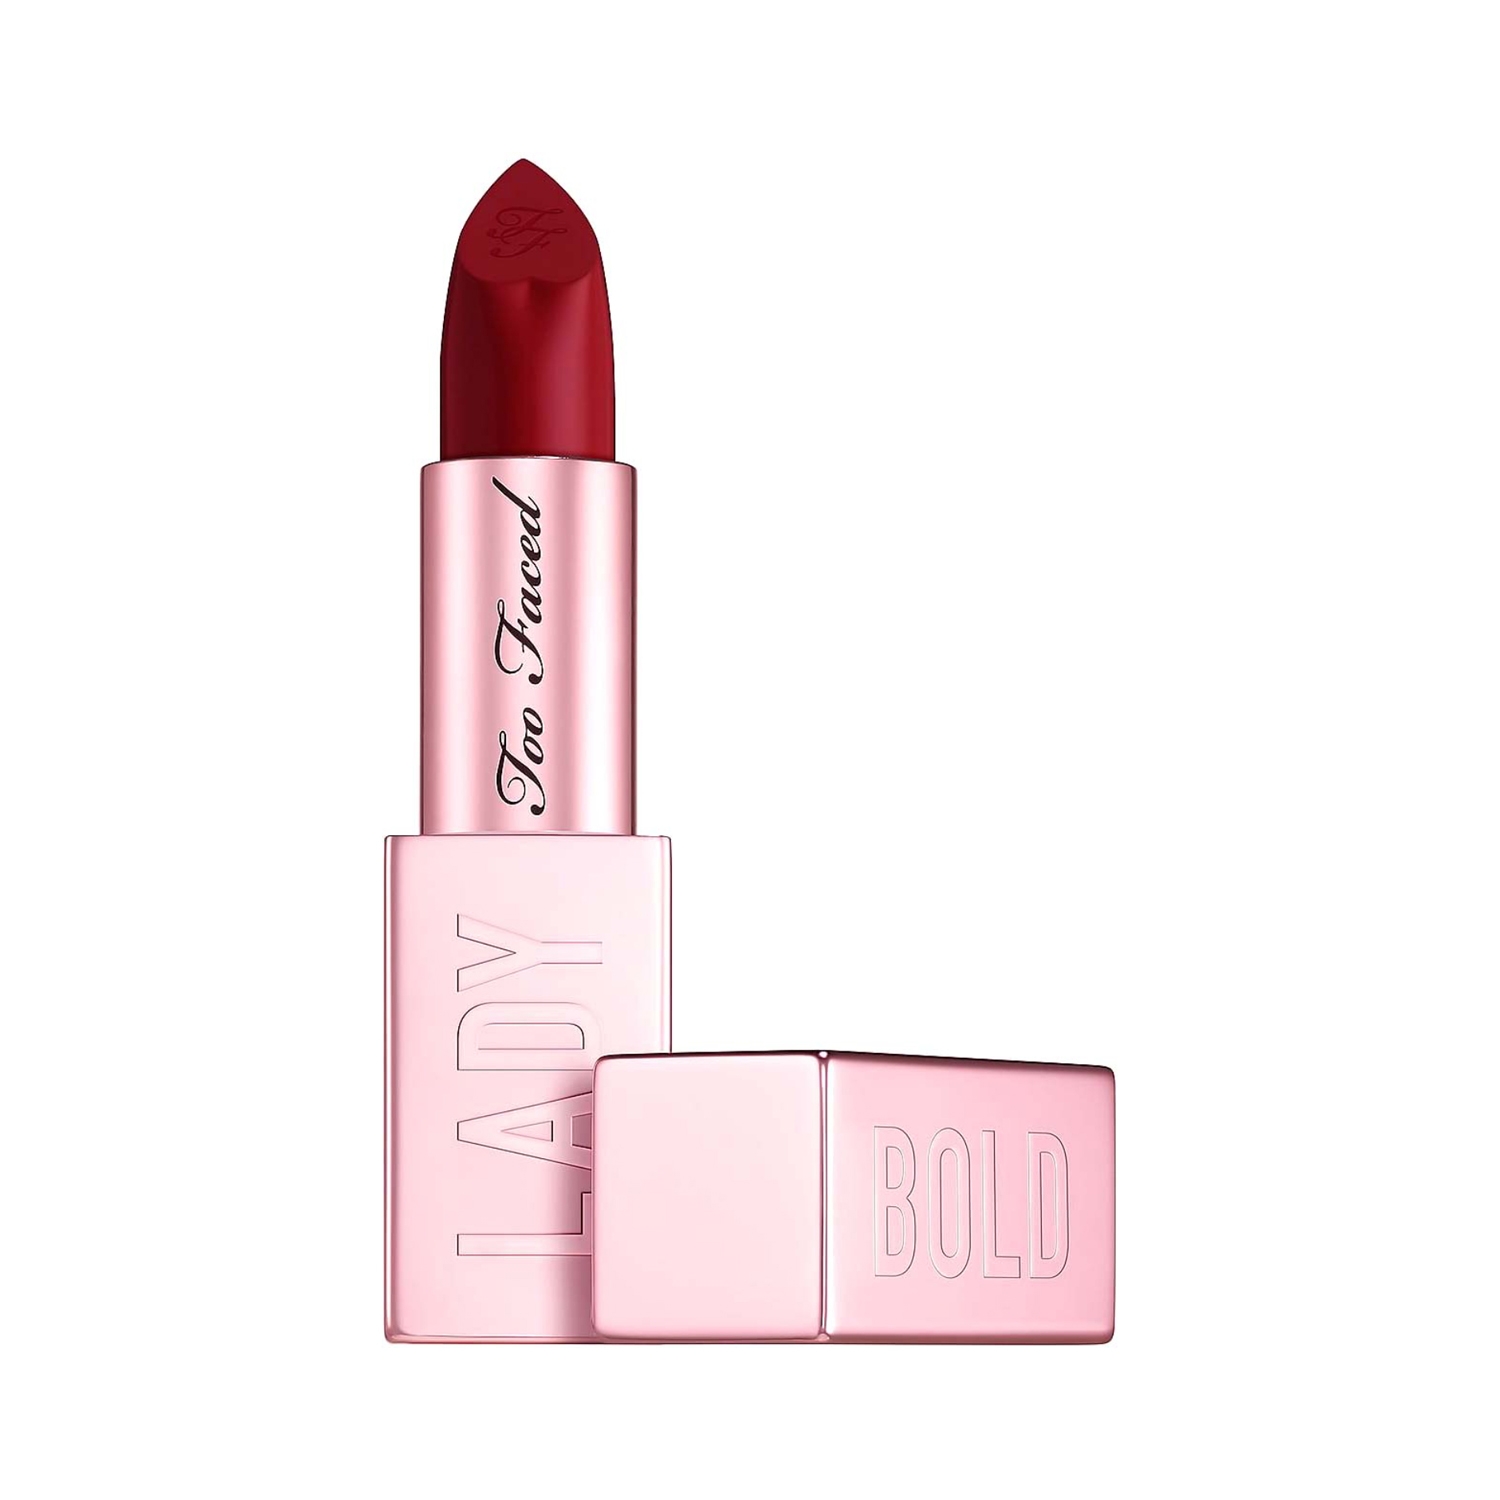 Too Faced Lady Bold Cream Lipstick - Take Over (4g)